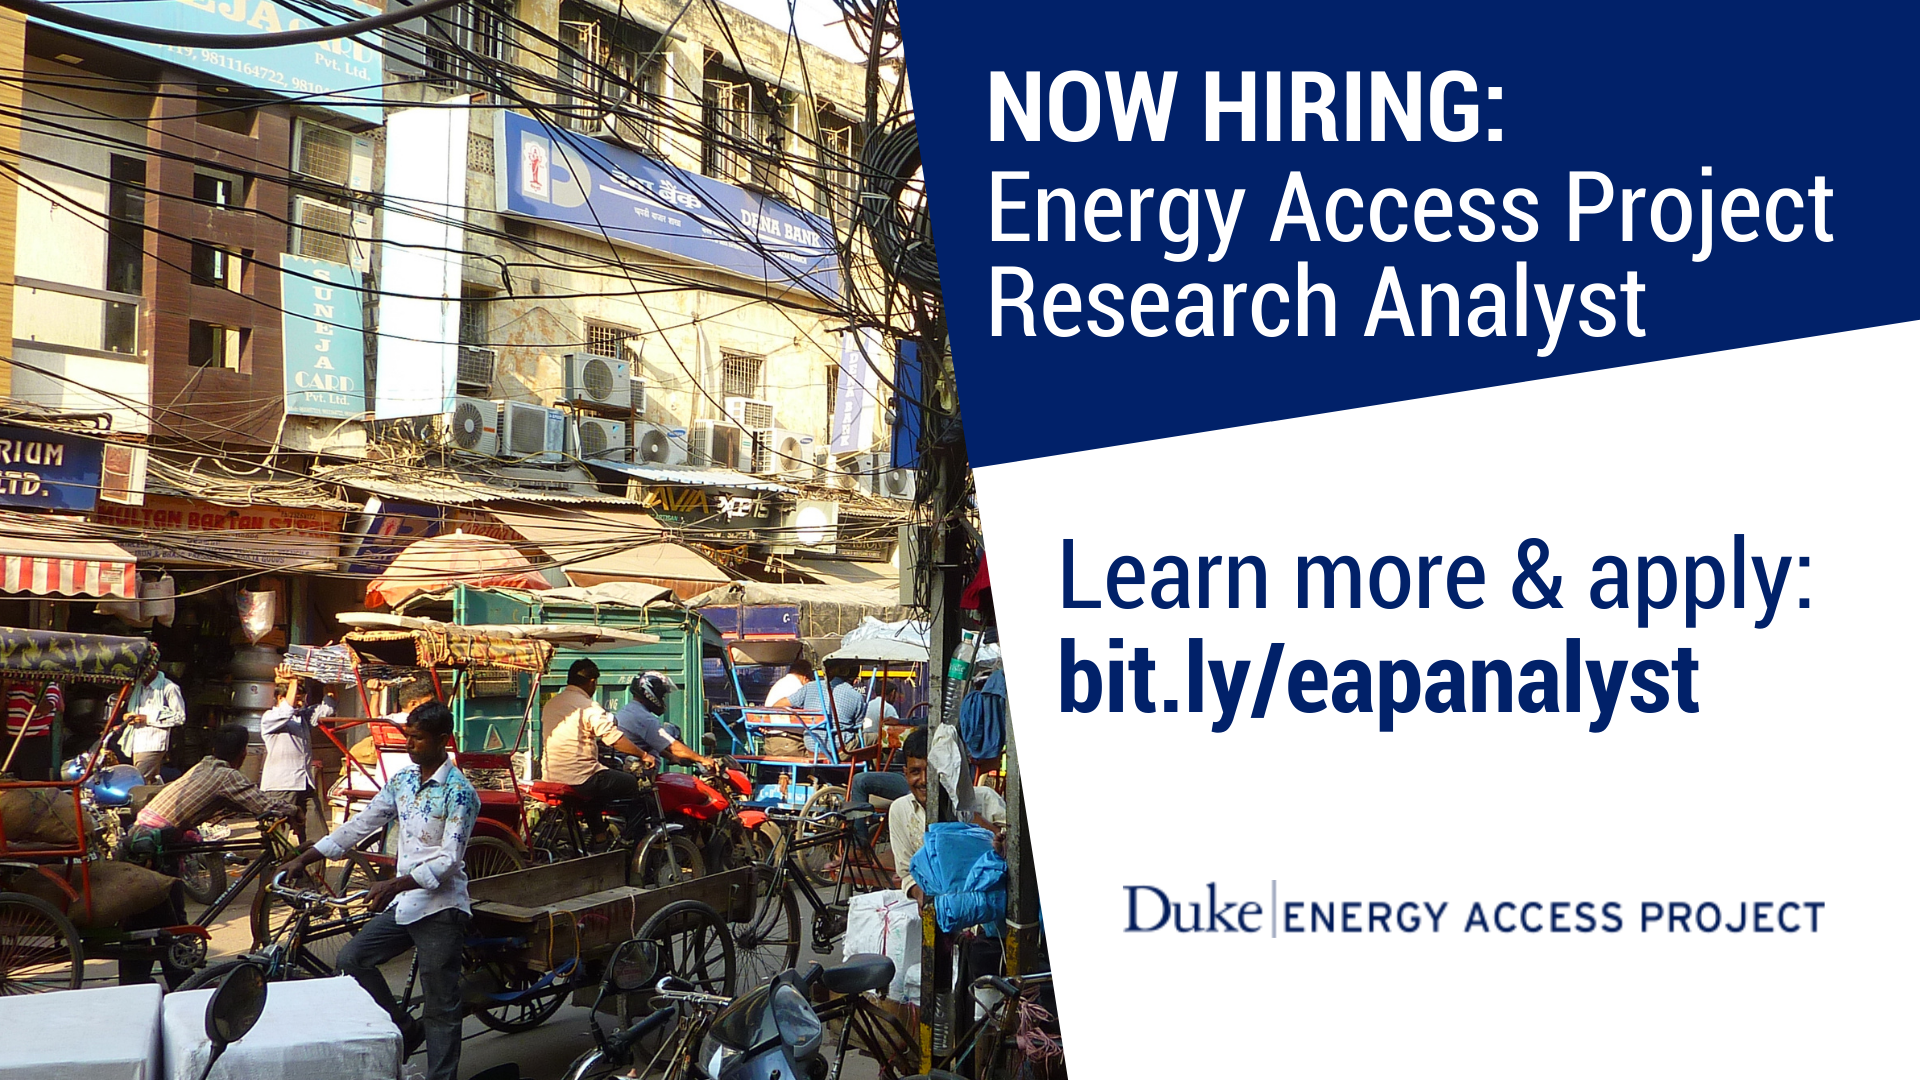 JOB ALERT: Energy Access Project Research Analyst